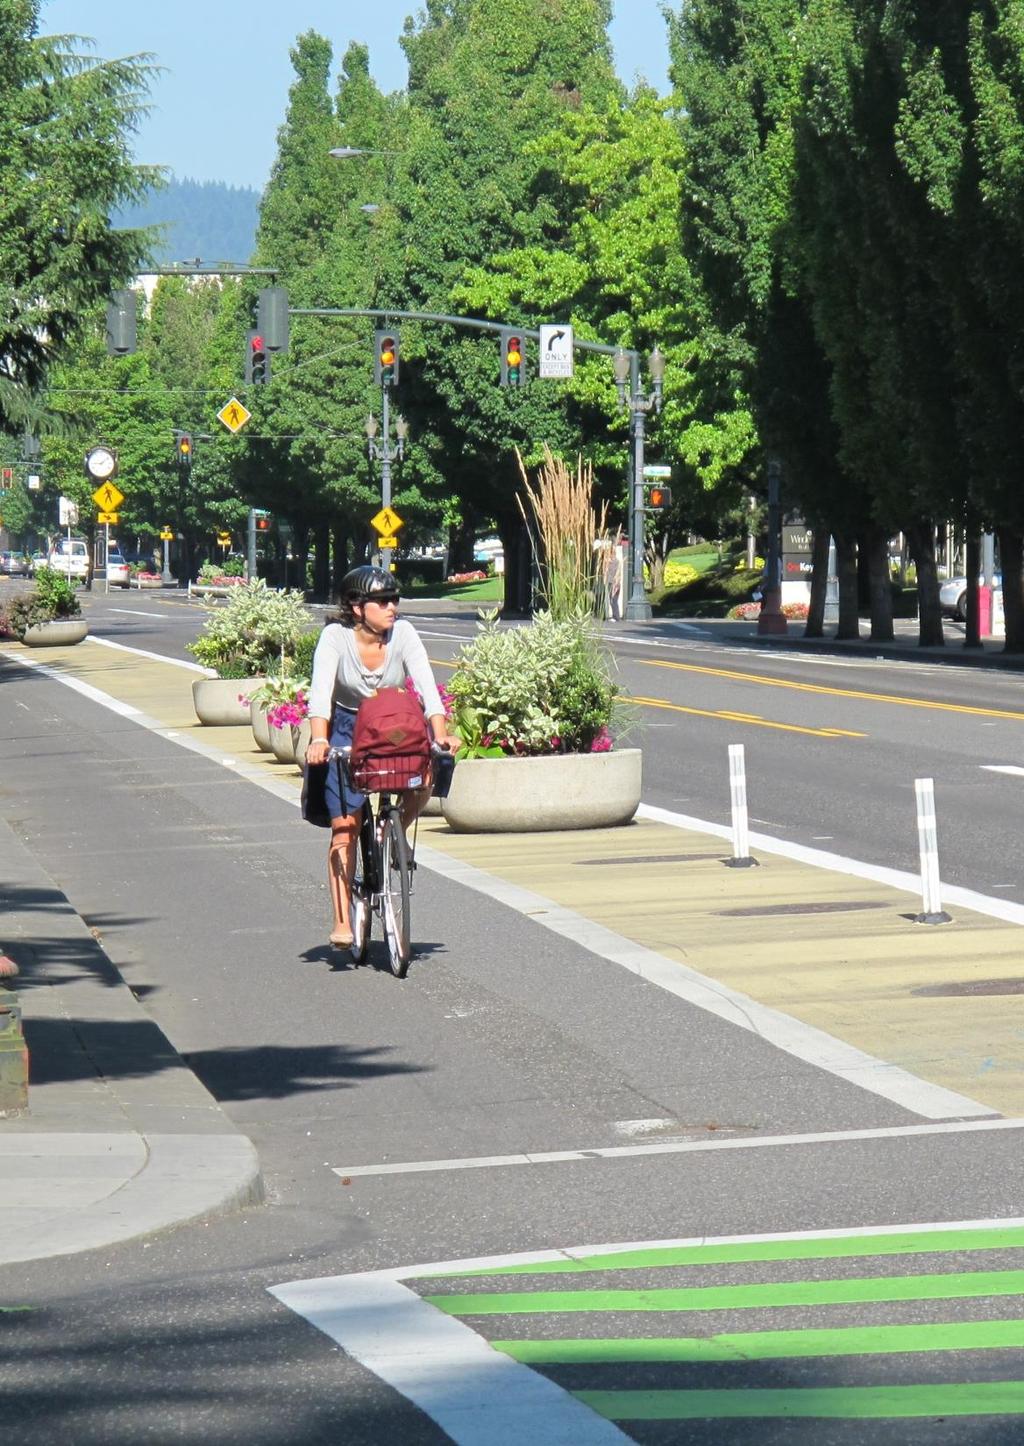 Lessons from the Green Lanes: Evaluating Protected Bike Lanes Full Report available: http://bit.